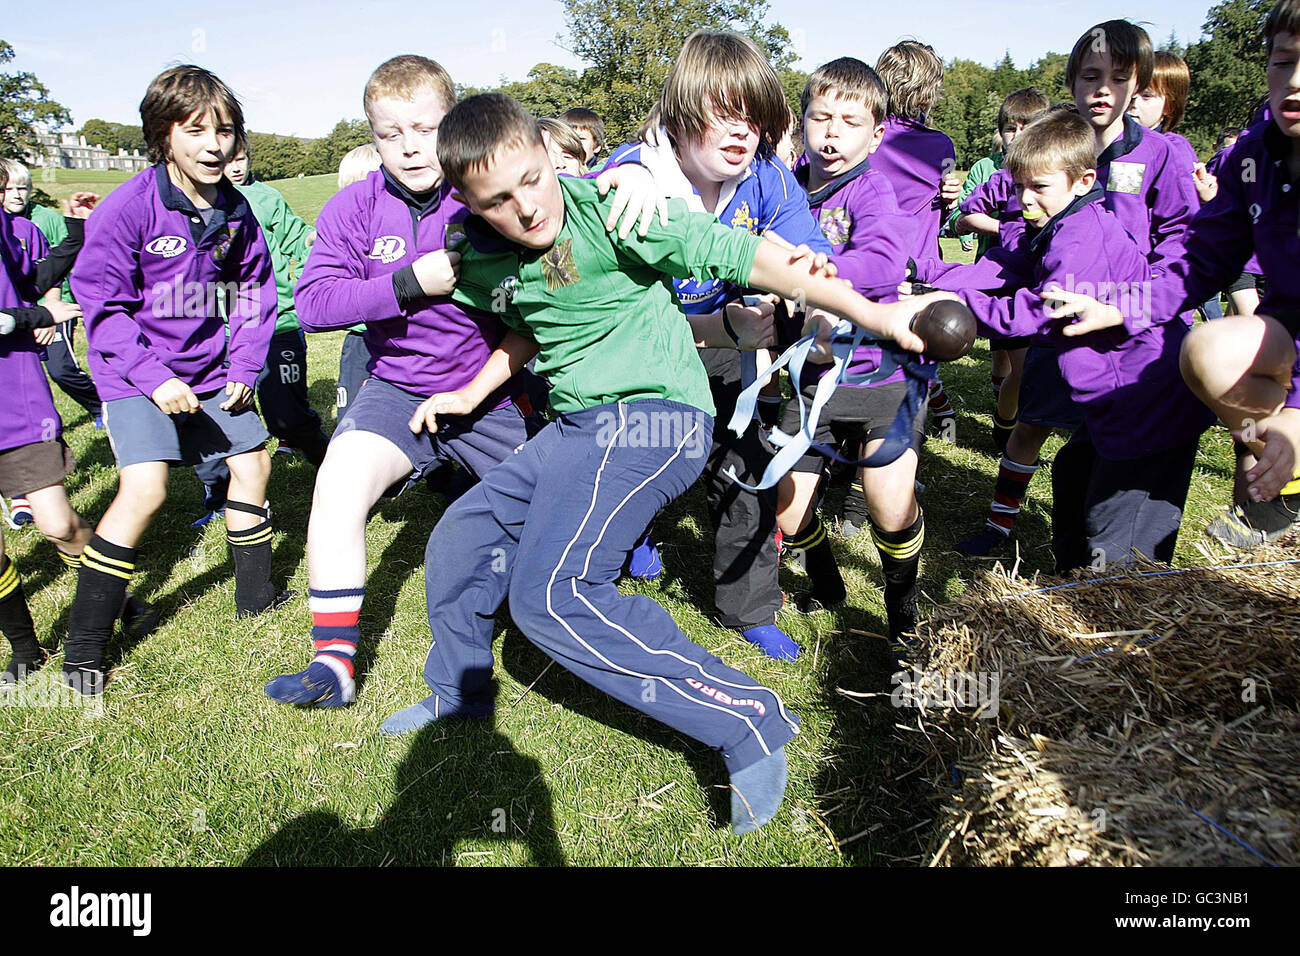 Selkirkshire's Kieran Slingsby (centre) reaches out to score a try as local school children in teams of Selkirkshire (green) and Roxburghshire (purple) take part in a re-enactment of the 1815 Carterhaugh Ba' game, that some historians believe was a forerunner to the game of rugby, at Bowhill, Selkirkshire. Stock Photo